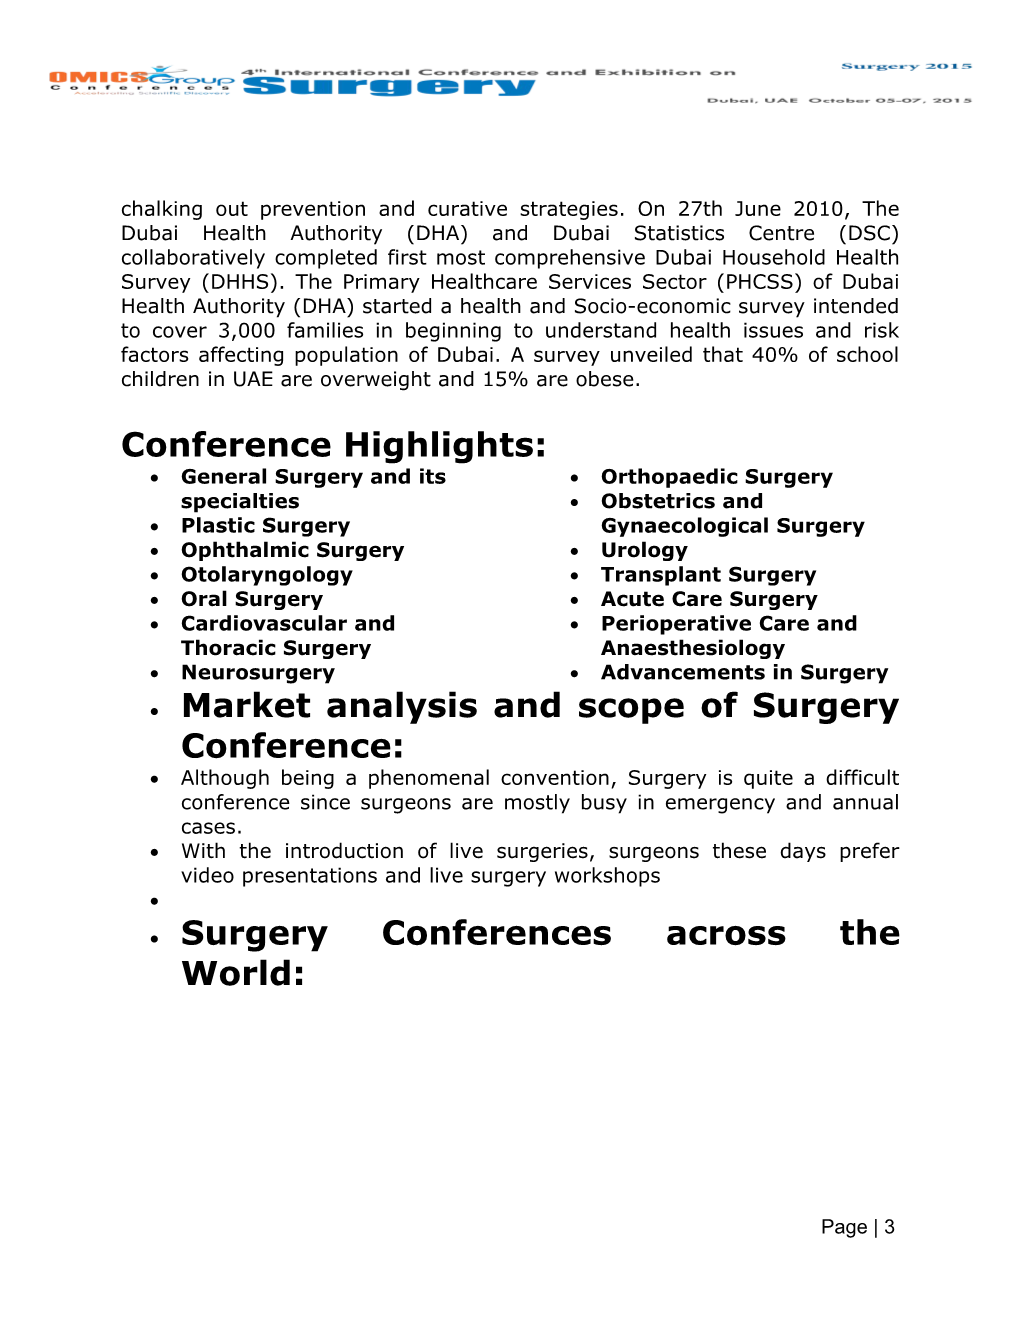 Importance of Surgery Conference